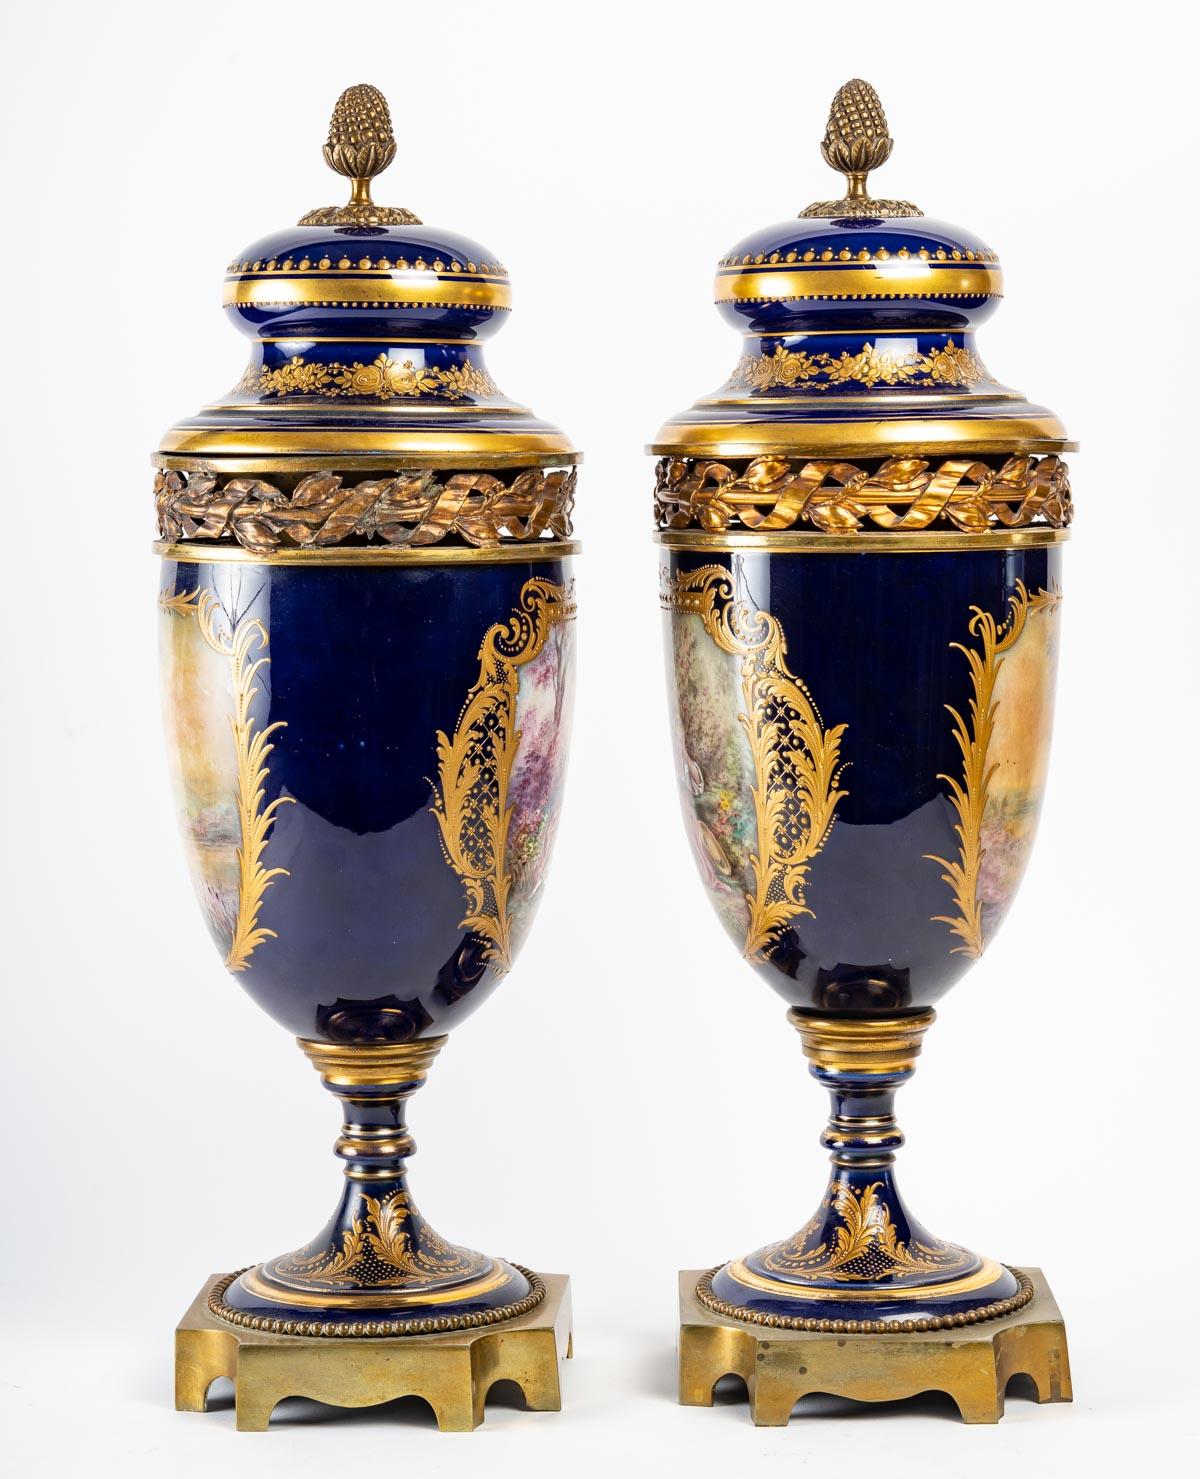 19th Century Pair of Sèvres Porcelain Covered Vases